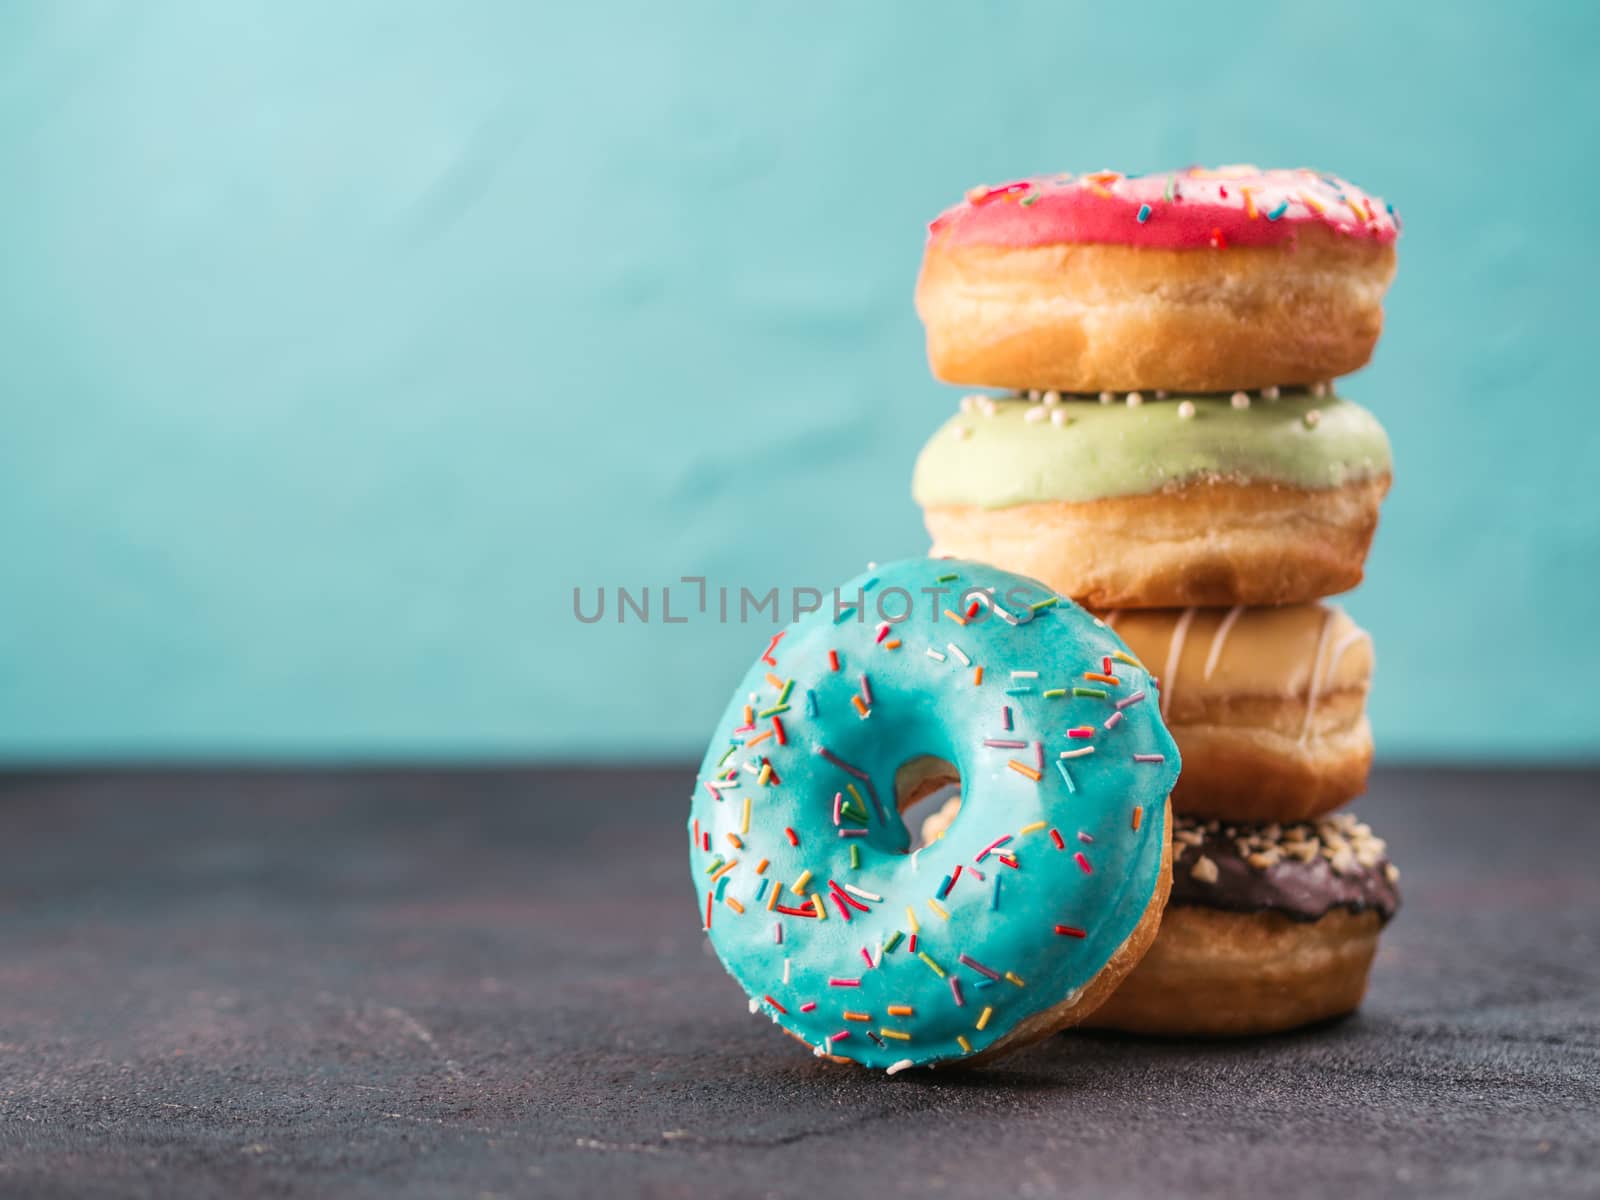 Stack of assorted donuts, copy space by fascinadora